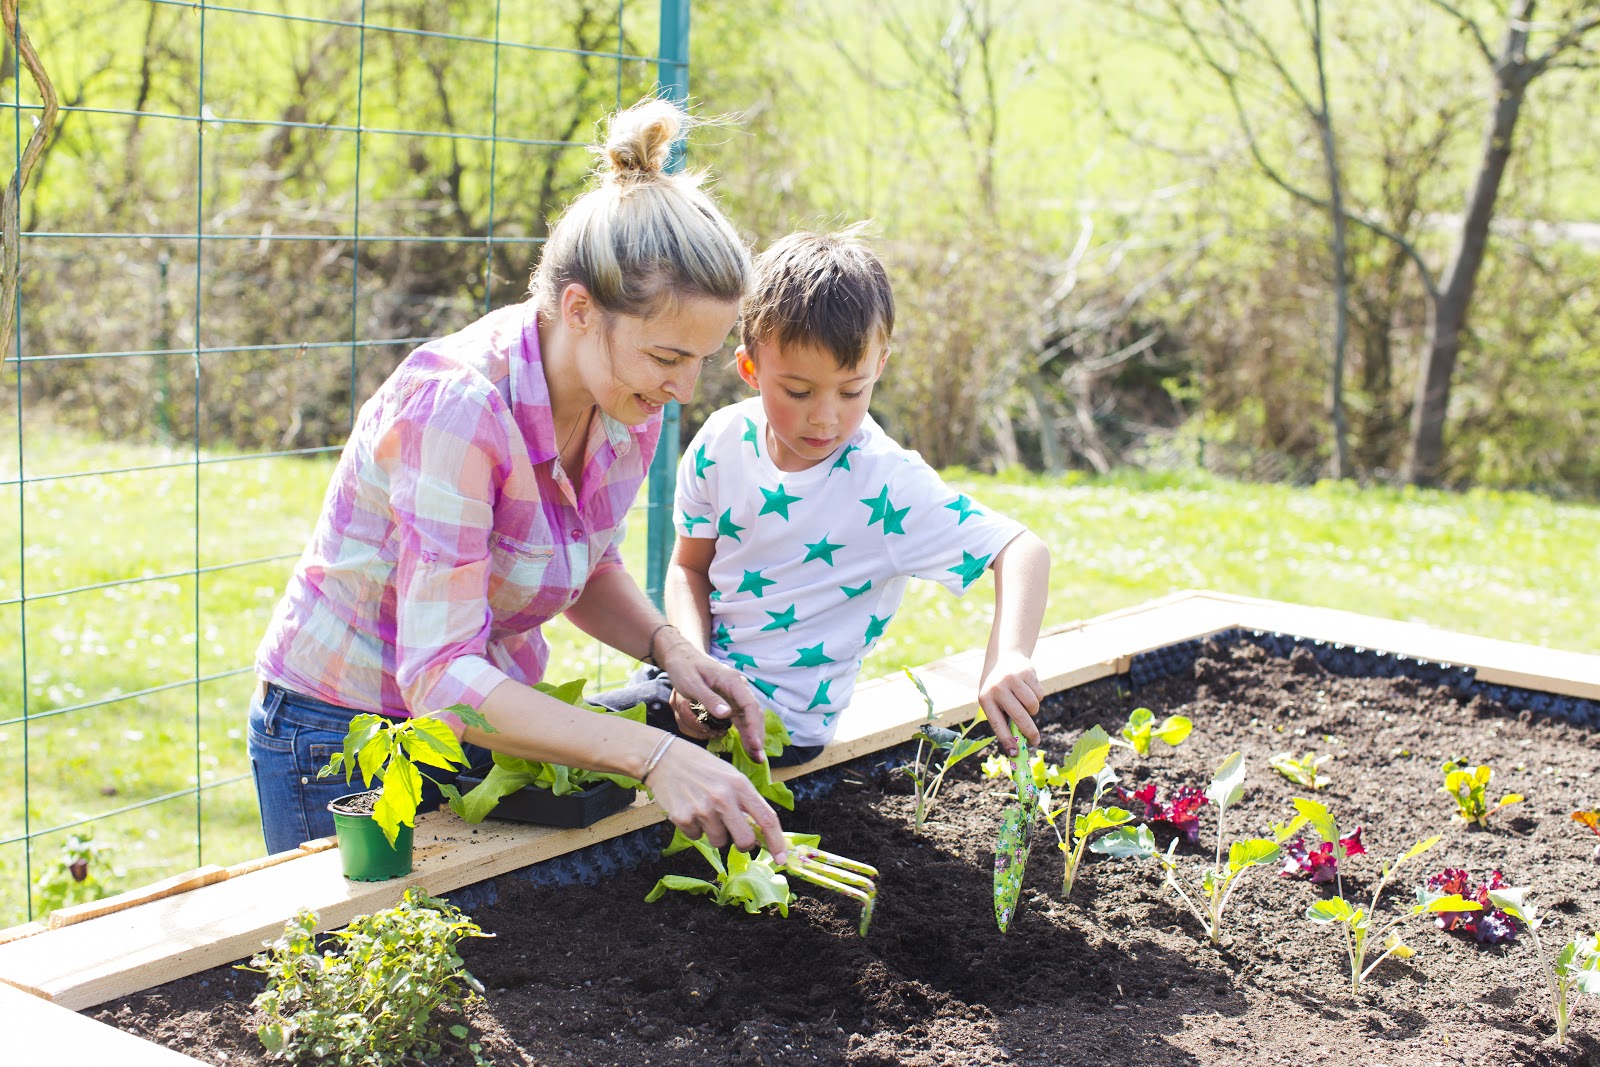 Raised Bed Gardening Benefits: What Do They Actually Do?